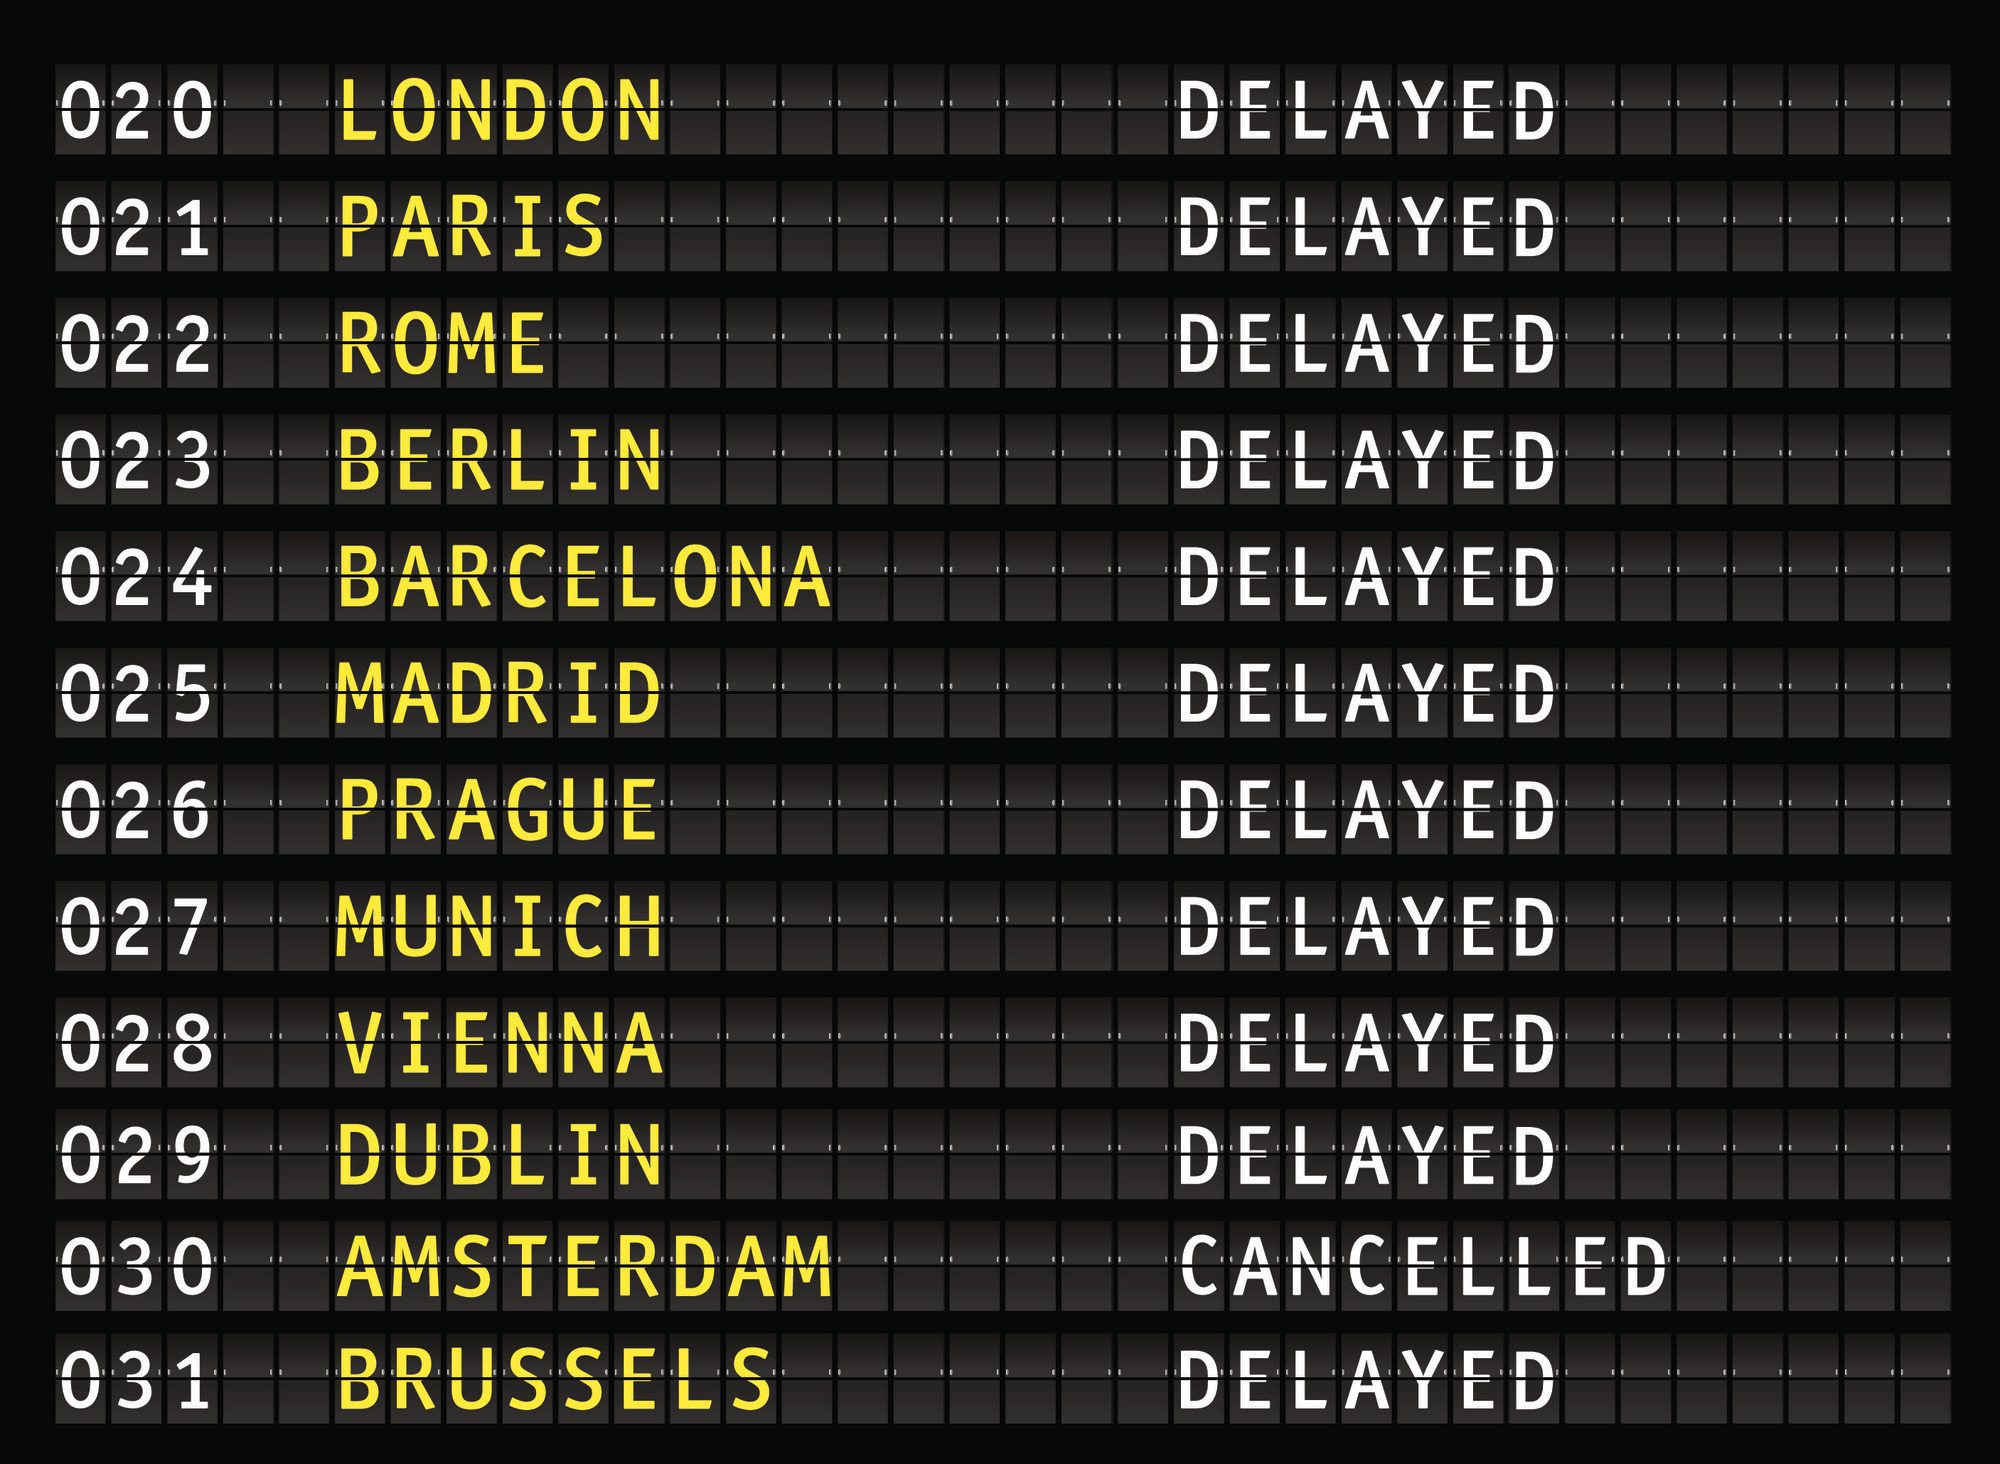 No time for delays